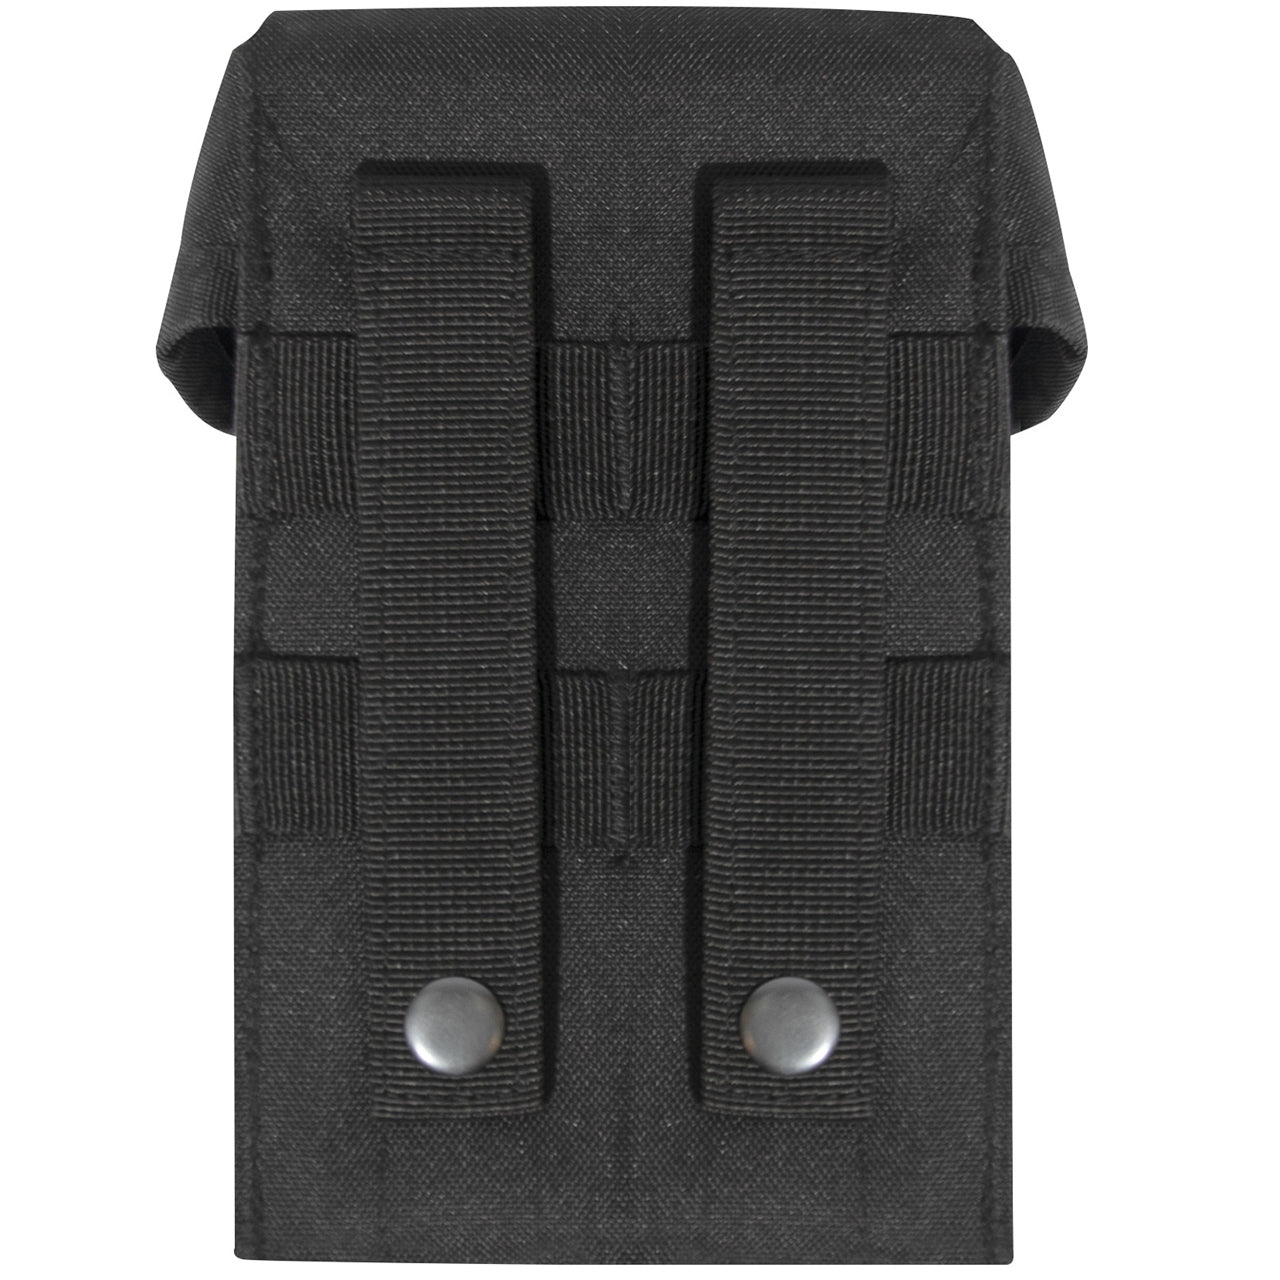 100 Round SAW Pouch is perfectly designed to integrate with modular gear. MOLLE Compatible Ammo Pouch With Two MOLLE Straps On The Back Can Hold A SAW 100-Round Ammo Box, 12 Gauge Shells, Drum Magazines, And More www.defenceqstore.com.au